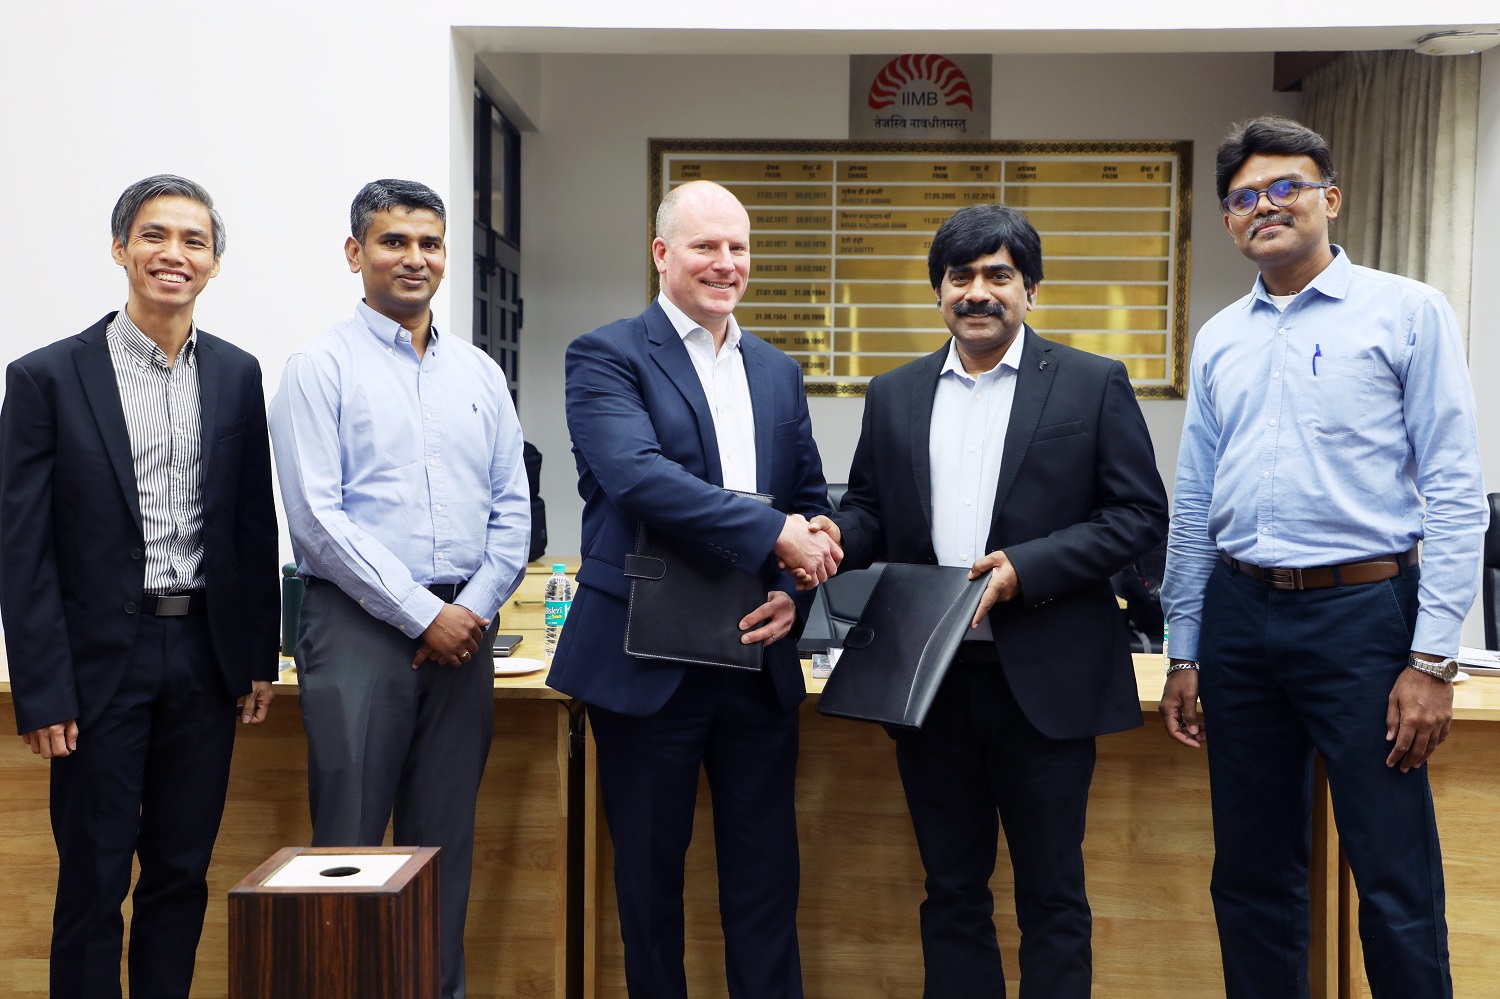 Prof. U Dinesh Kumar, Chairperson, Data Centre and Analytics Lab, IIM Bangalore (fourth from left), during the exchange of a Research Agreement between IIM Bangalore and Cargill on 1st February 2023, to leverage the Data Centre & Analytics Lab at IIMB. Through this partnership, IIMB will help Cargill with research and data driven solutions to help solve unique business challenges through Data Science capabilities.